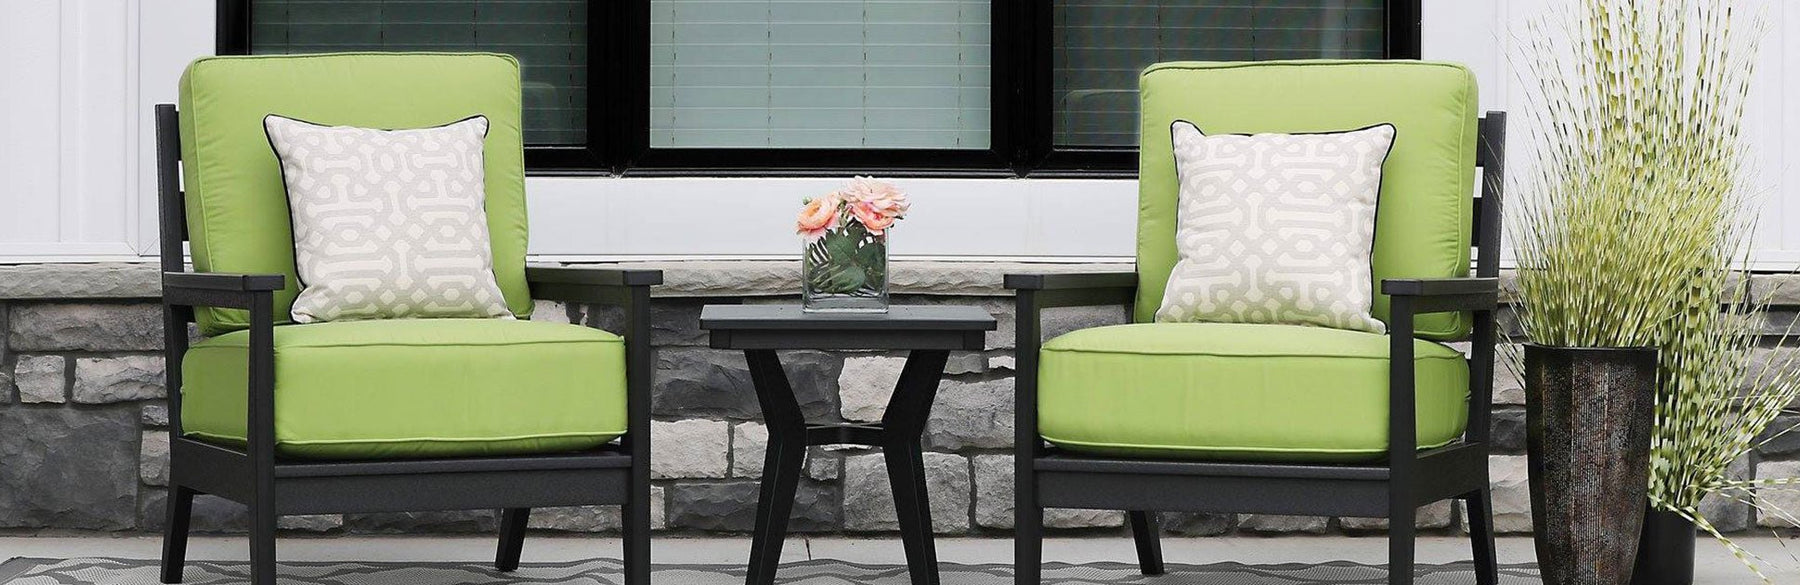 Turn a Small Space Into an Outdoor Oasis With the Right Patio Furniture - Great Backyard Place